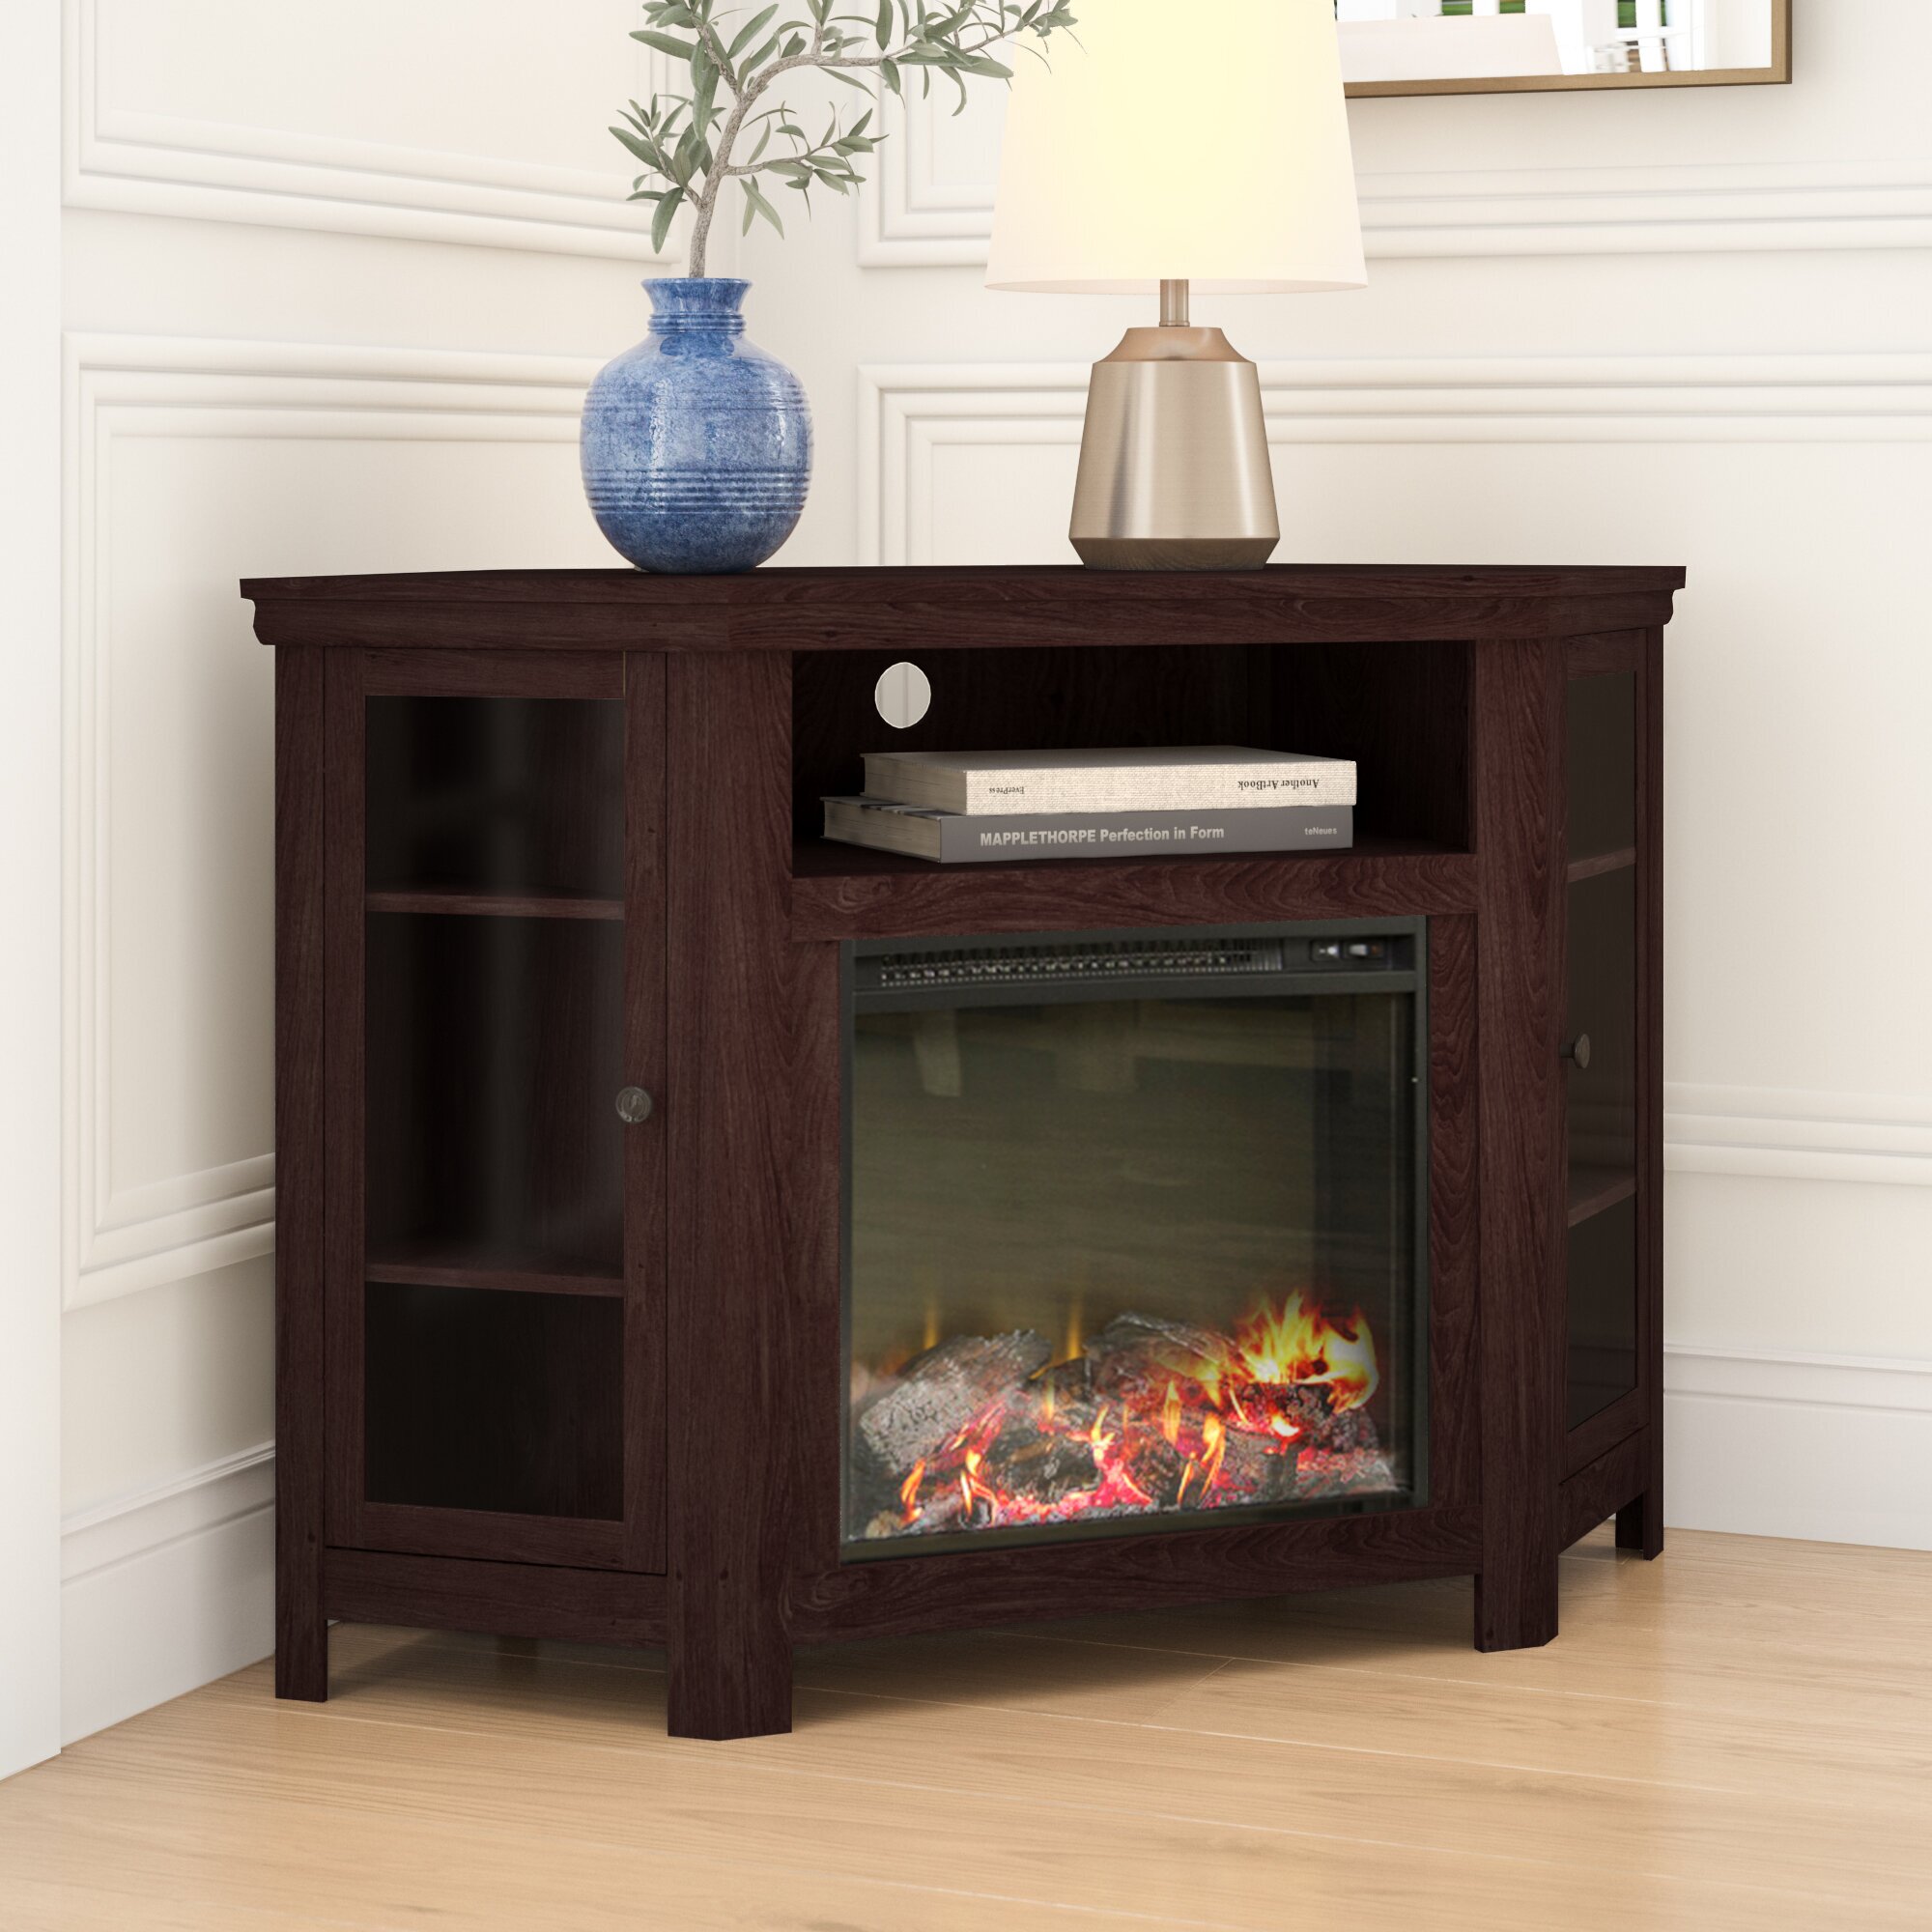 Wayfair Electric Fireplace Inserts Unique Media Fireplace with Remote